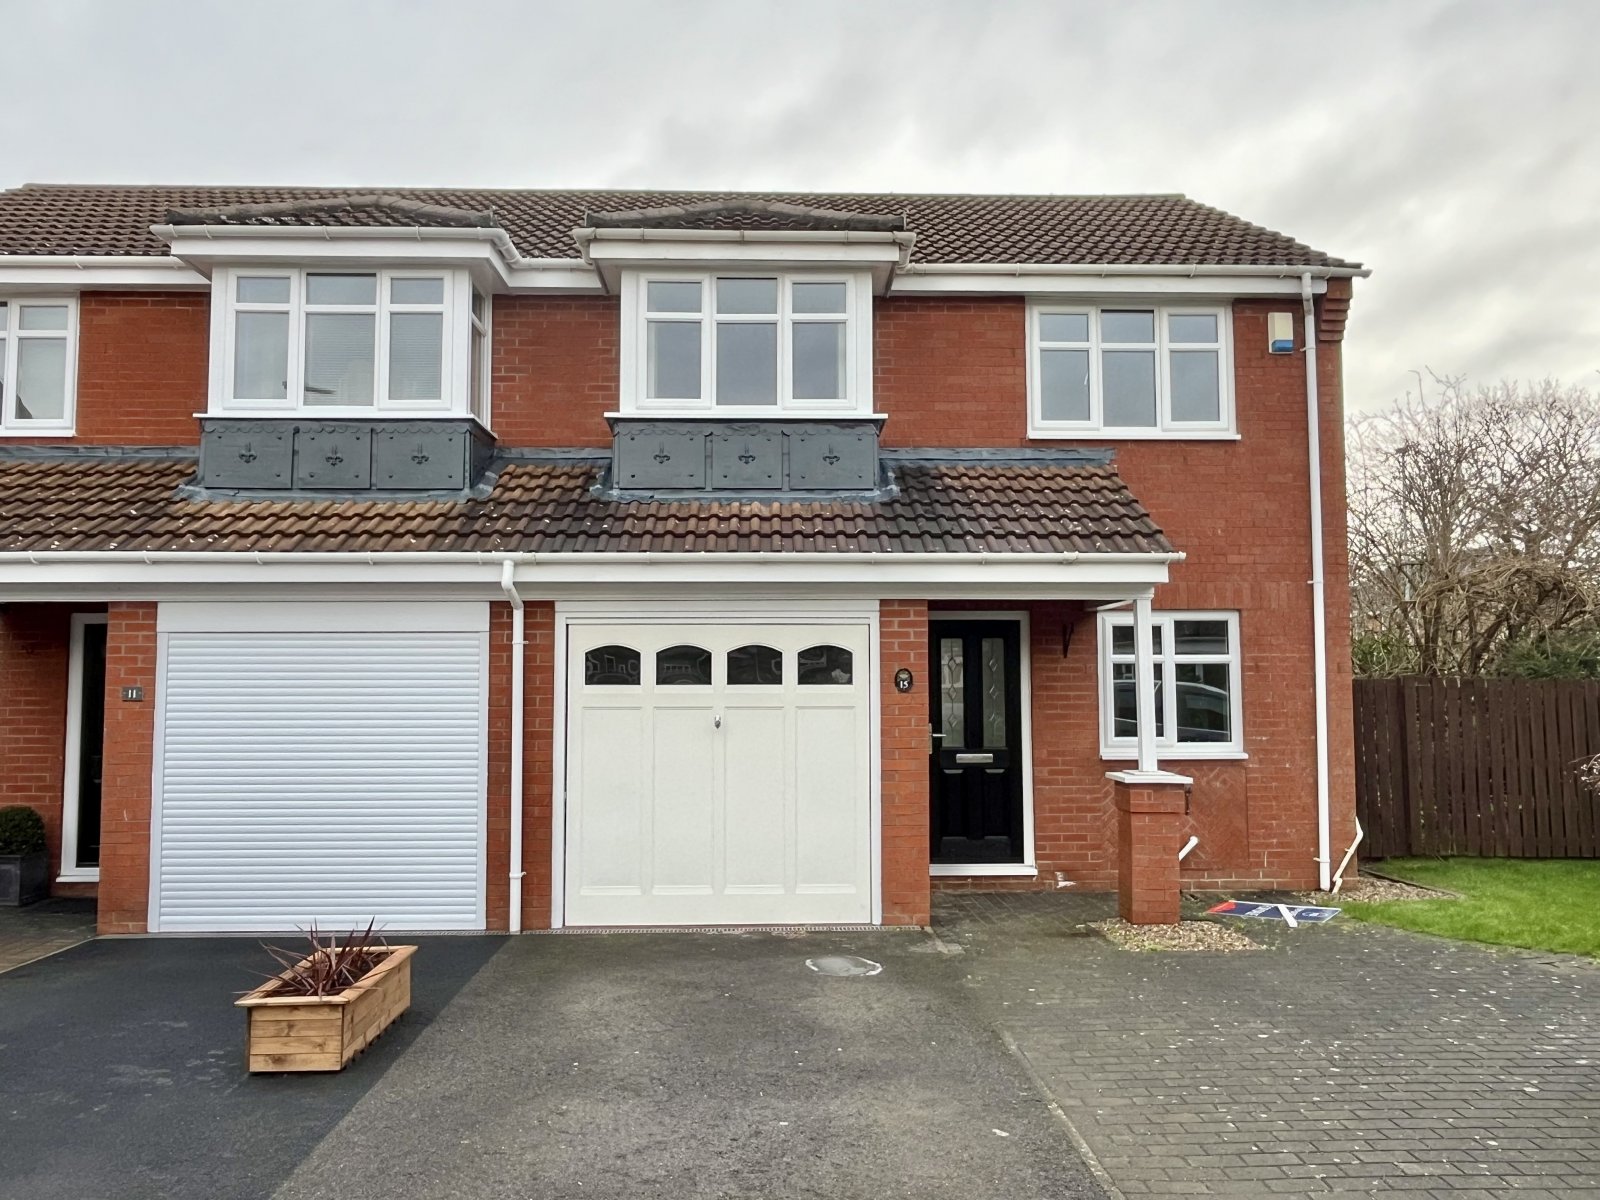 3 bed house for sale in Crosswell Park, Ingleby Barwick - Property Image 1